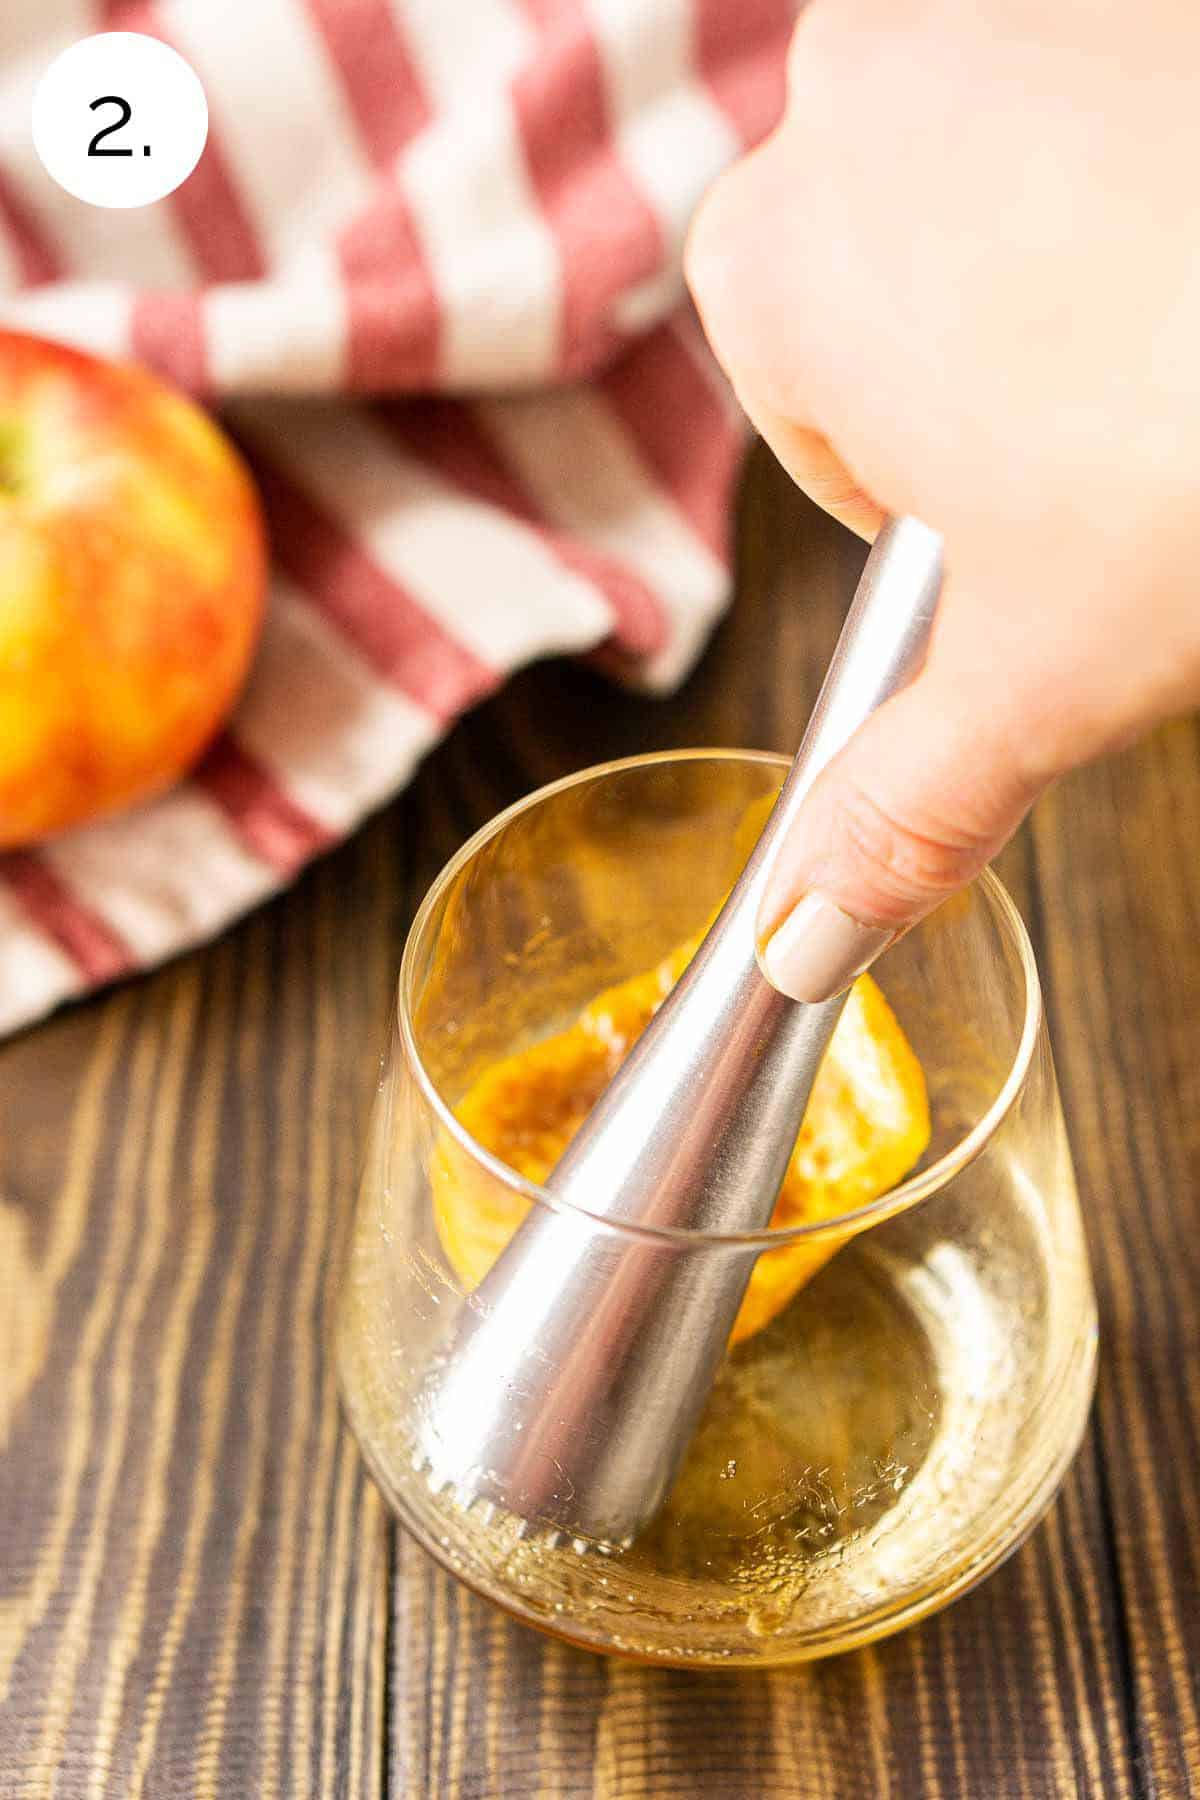 A hand holding a muddler and using it to dissolve the brown sugar in an old fashioned glass on a wooden board.